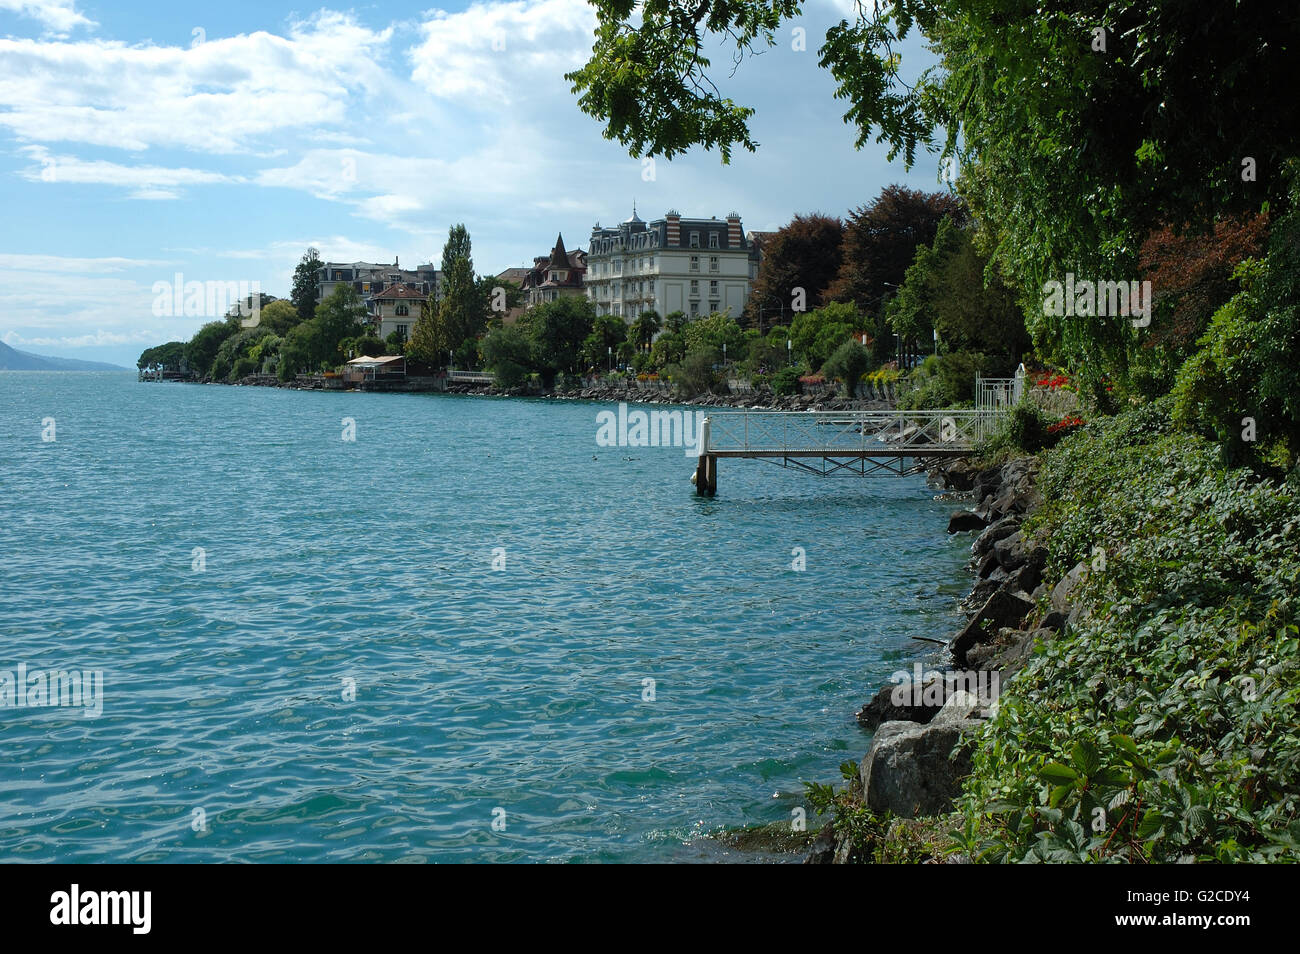 Pier and buildings in Clarens at Geneve lake in Switzerland Stock Photo